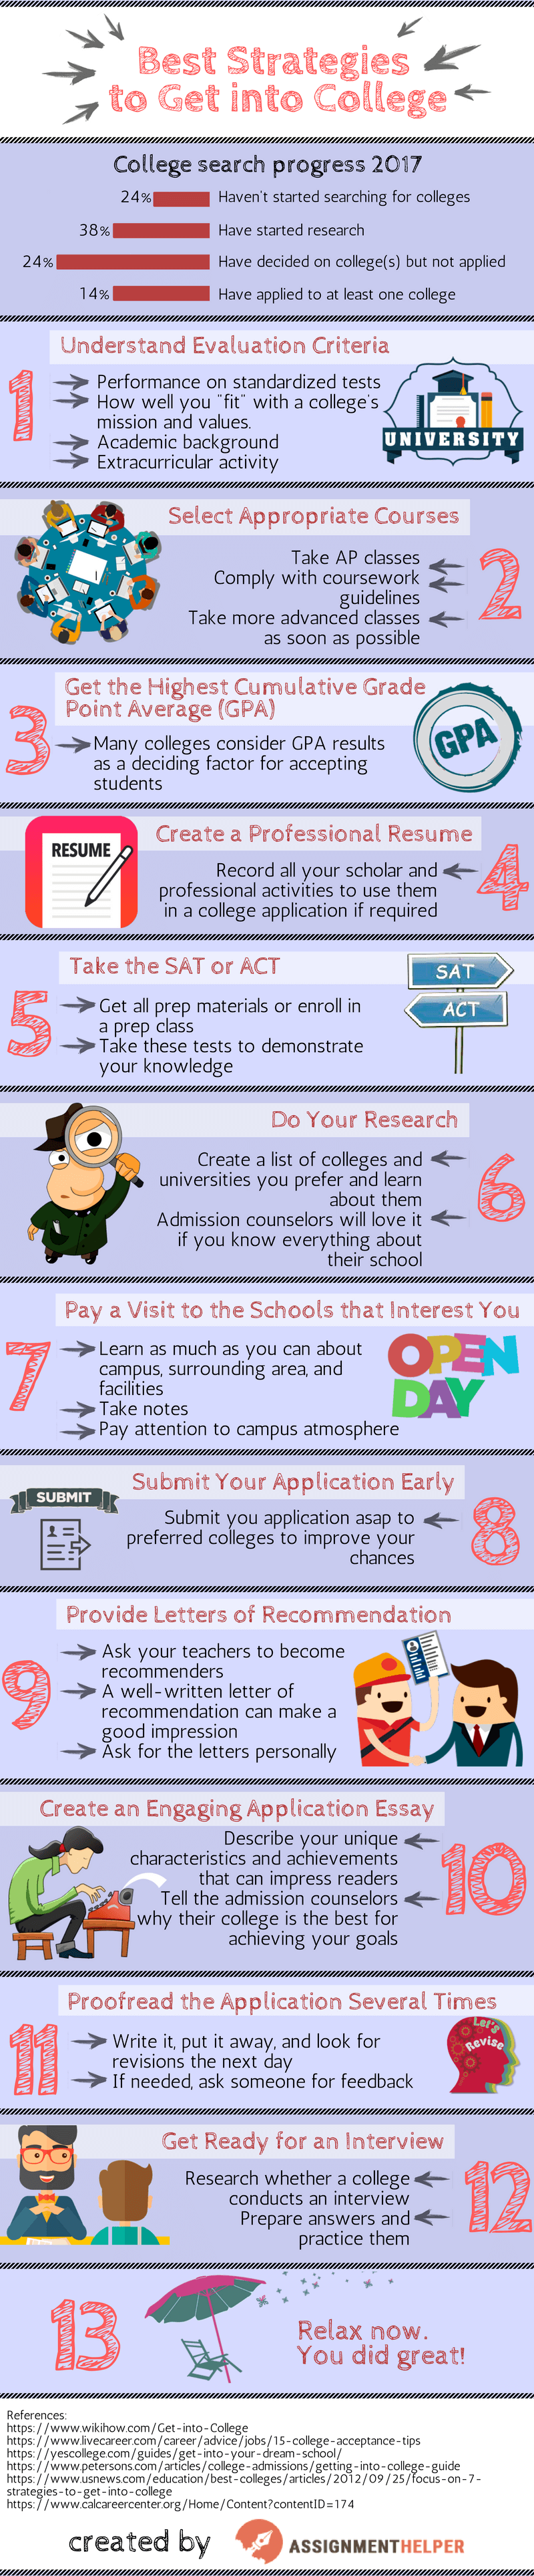 Best Strategies To Get Into College Infographic